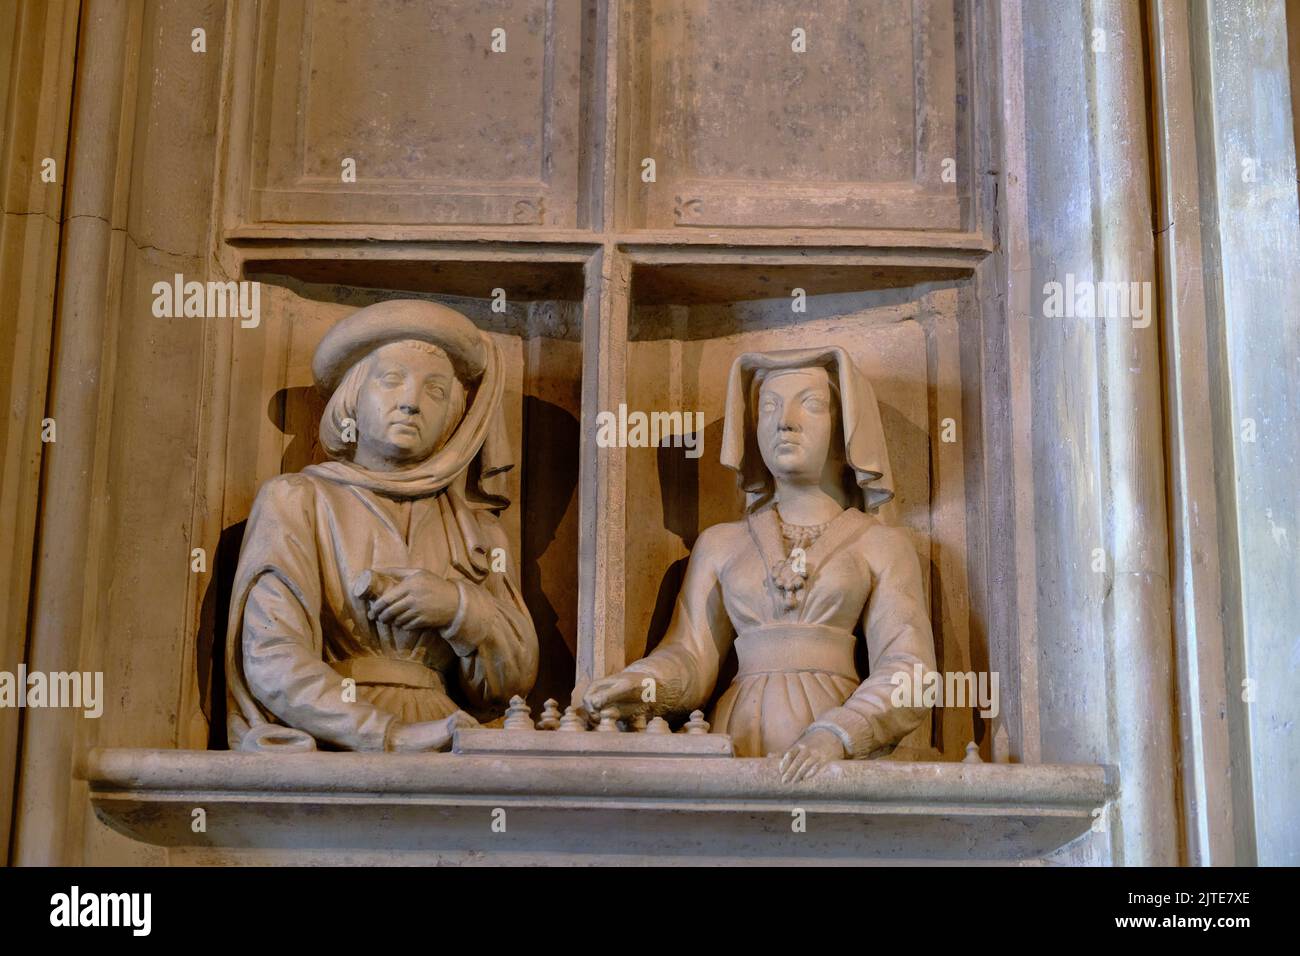 France, Cher (18), Bourges, Jaques Coeur Palace, the South Gallery, fireplace mantel's sculpture depicting the life of noble people Stock Photo